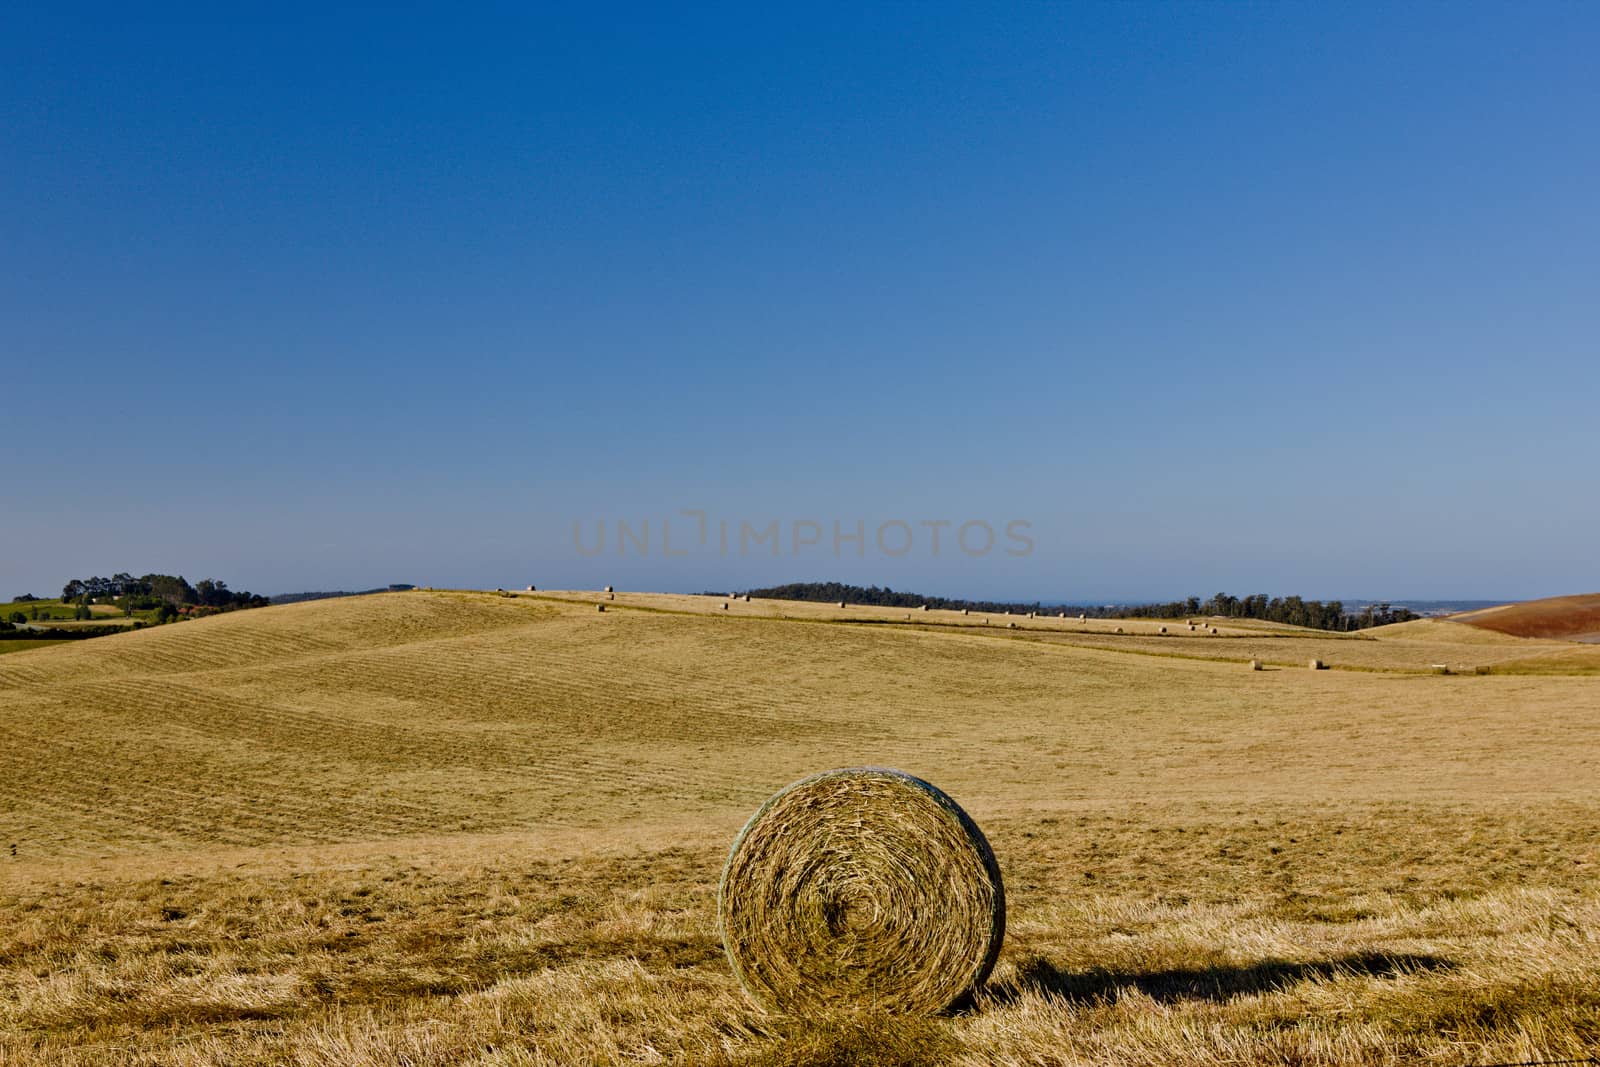 Circular hay bale in a newly cut agricultural field landscape under sunny blue sky